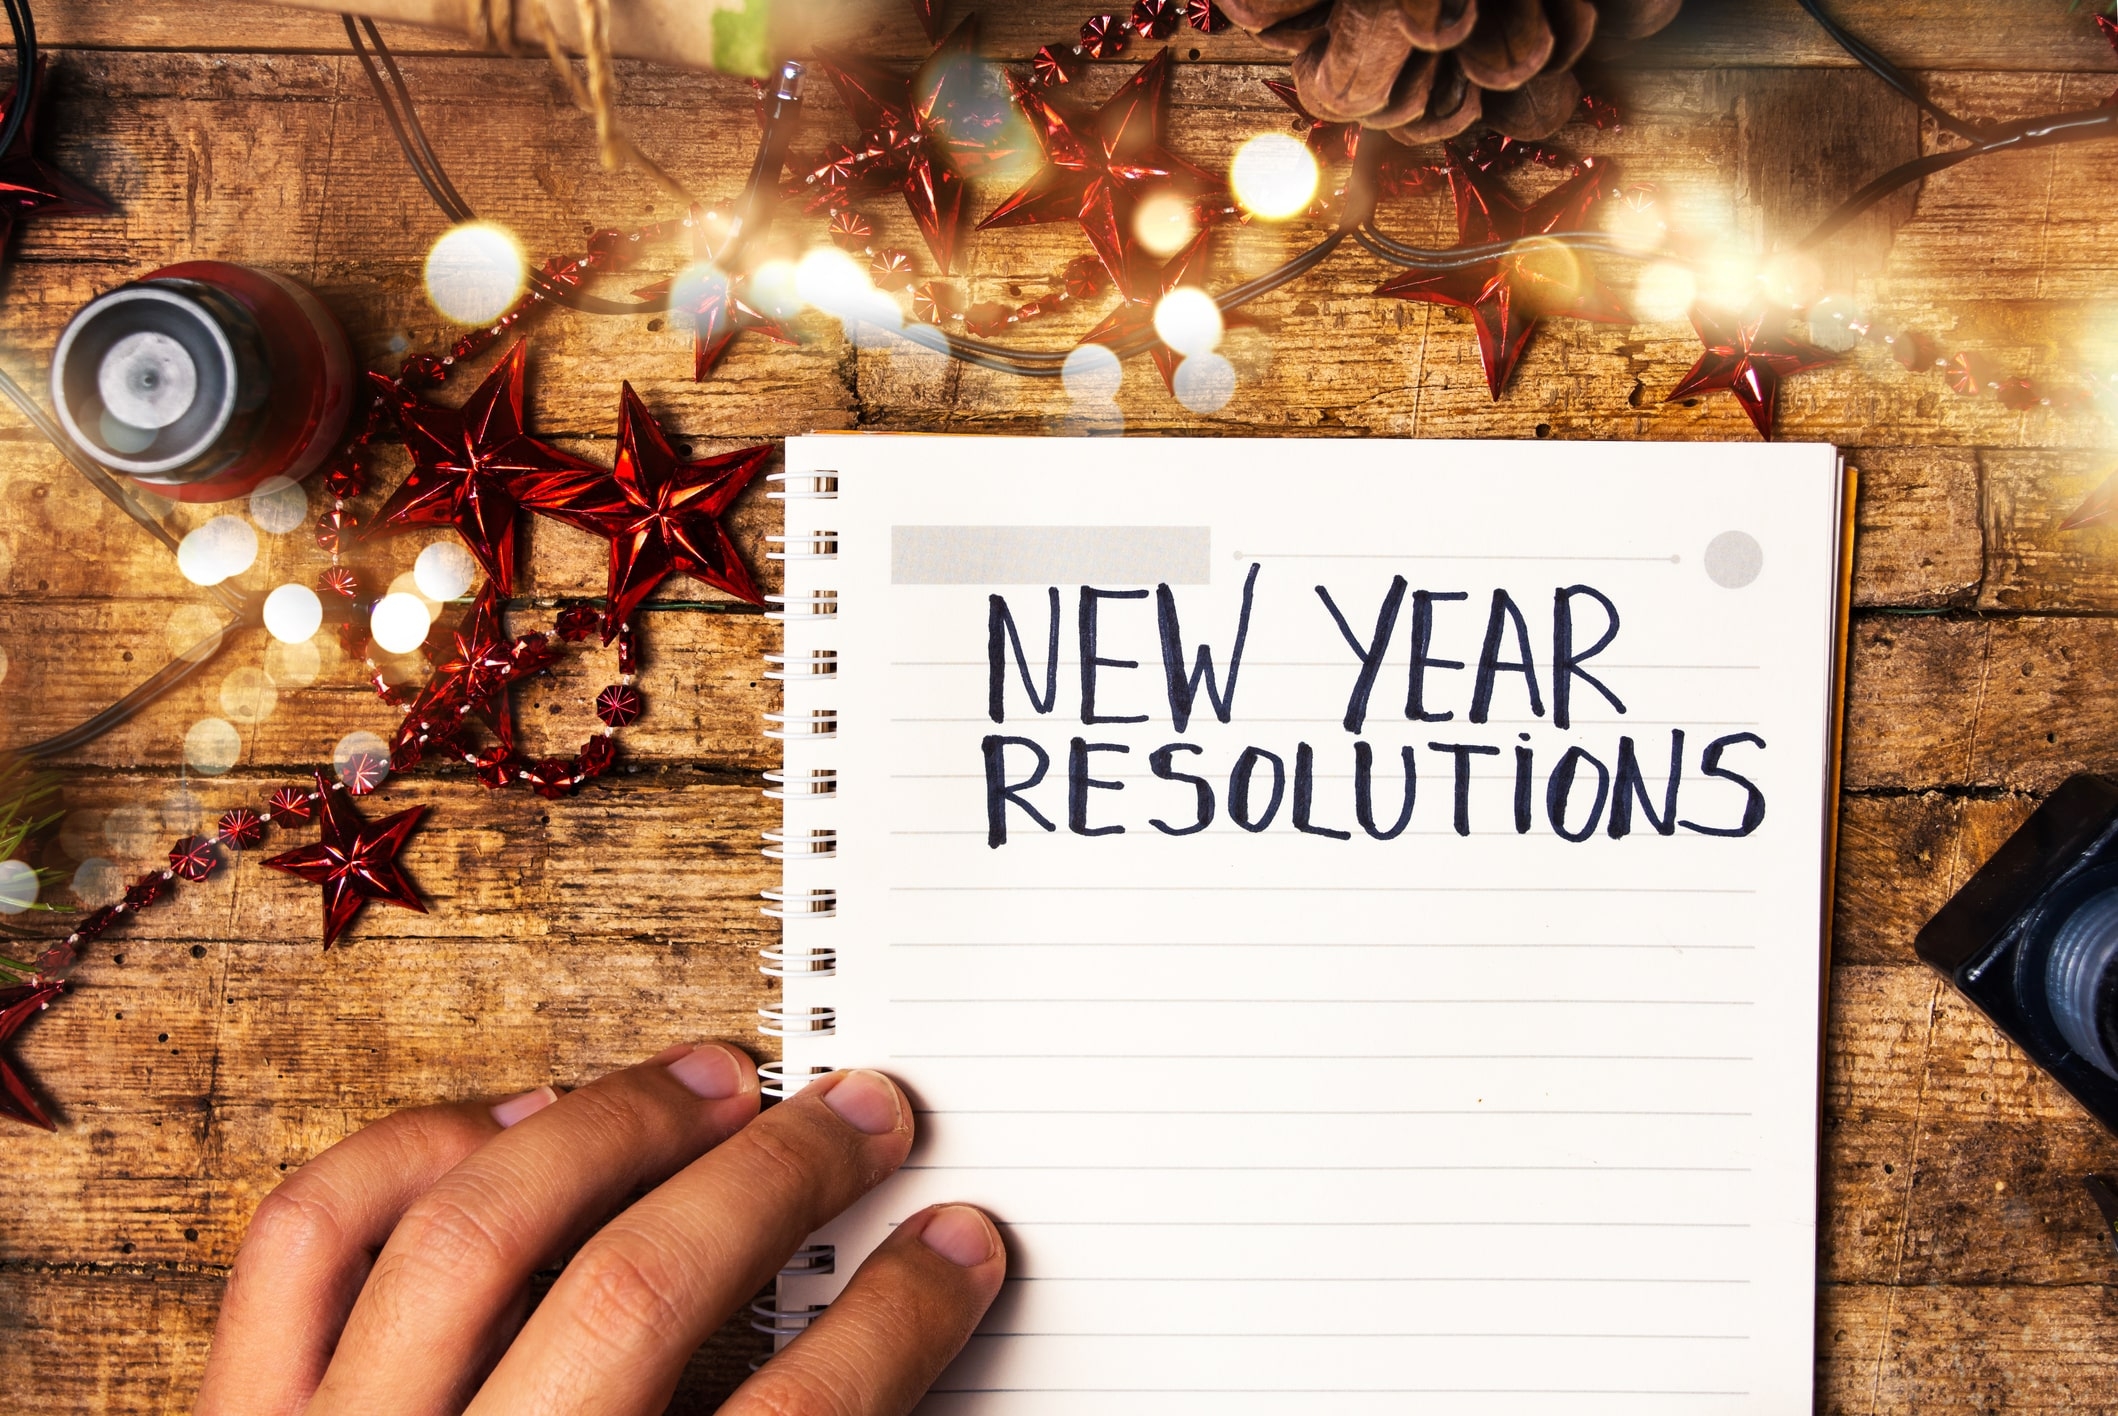 You Got This: How to be in the 9% of resolutions-keepers one year from today